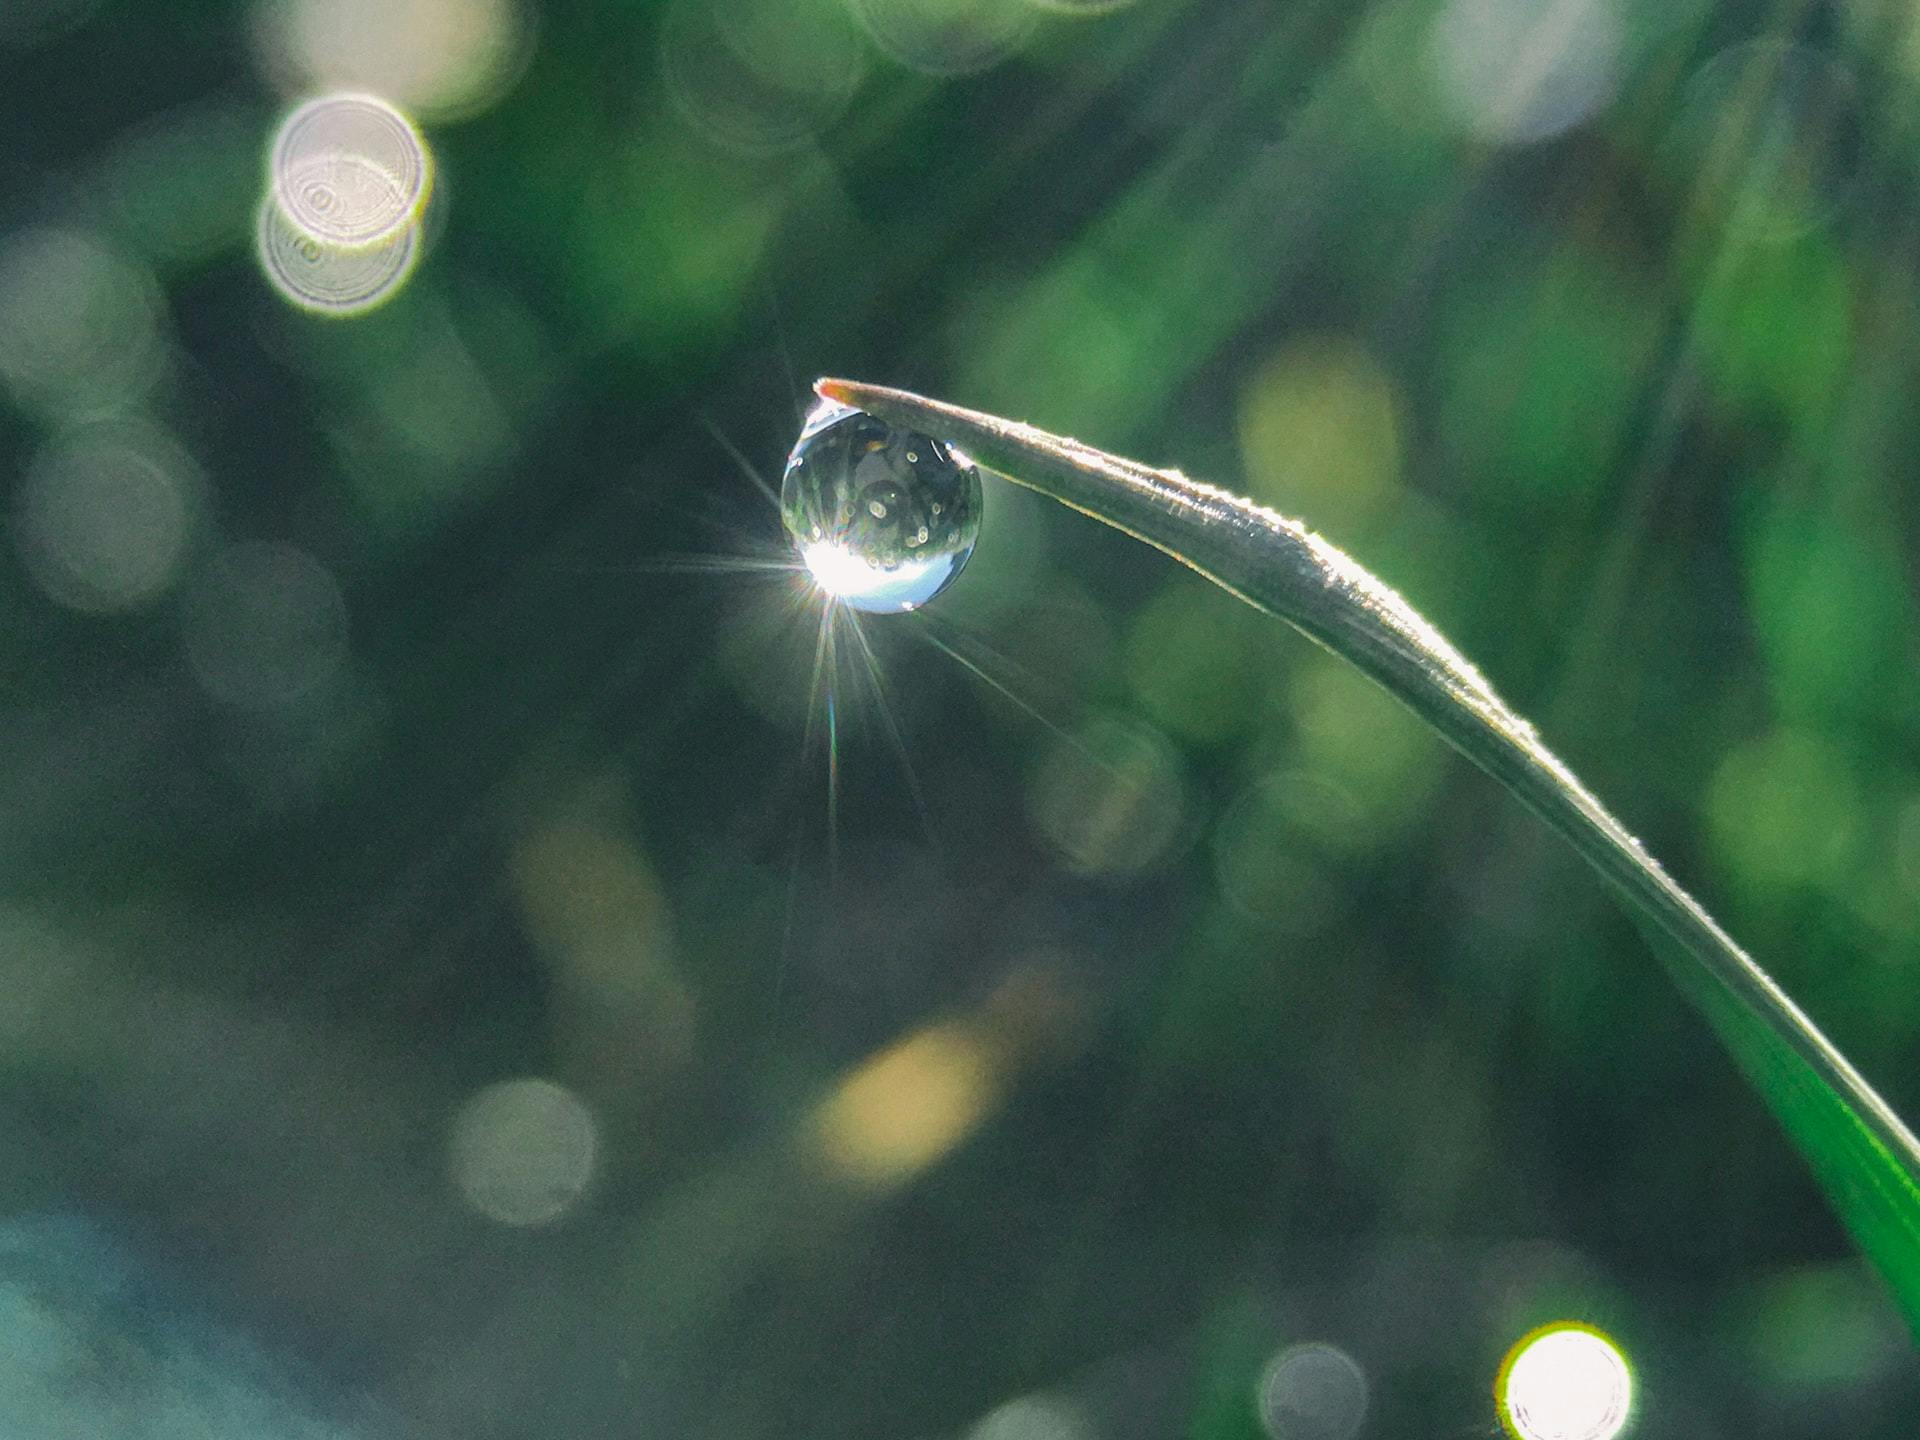 A water droplet.